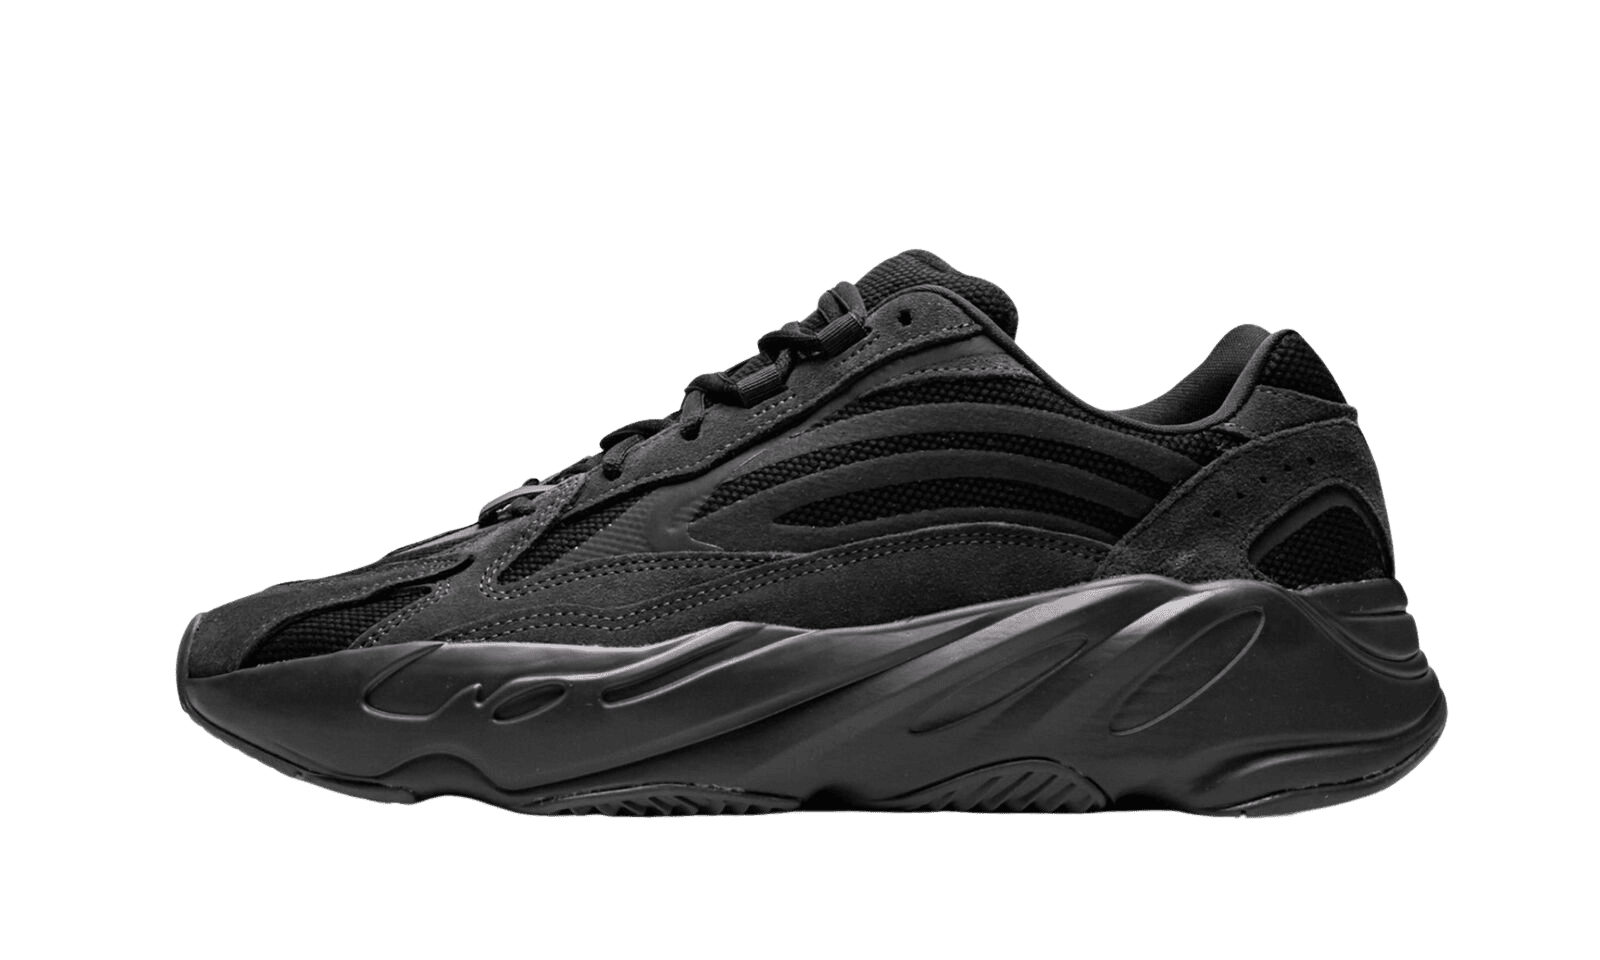 Boost Technology Powers Yeezy Boost 700 V2 Sneakers Comfort | eBay